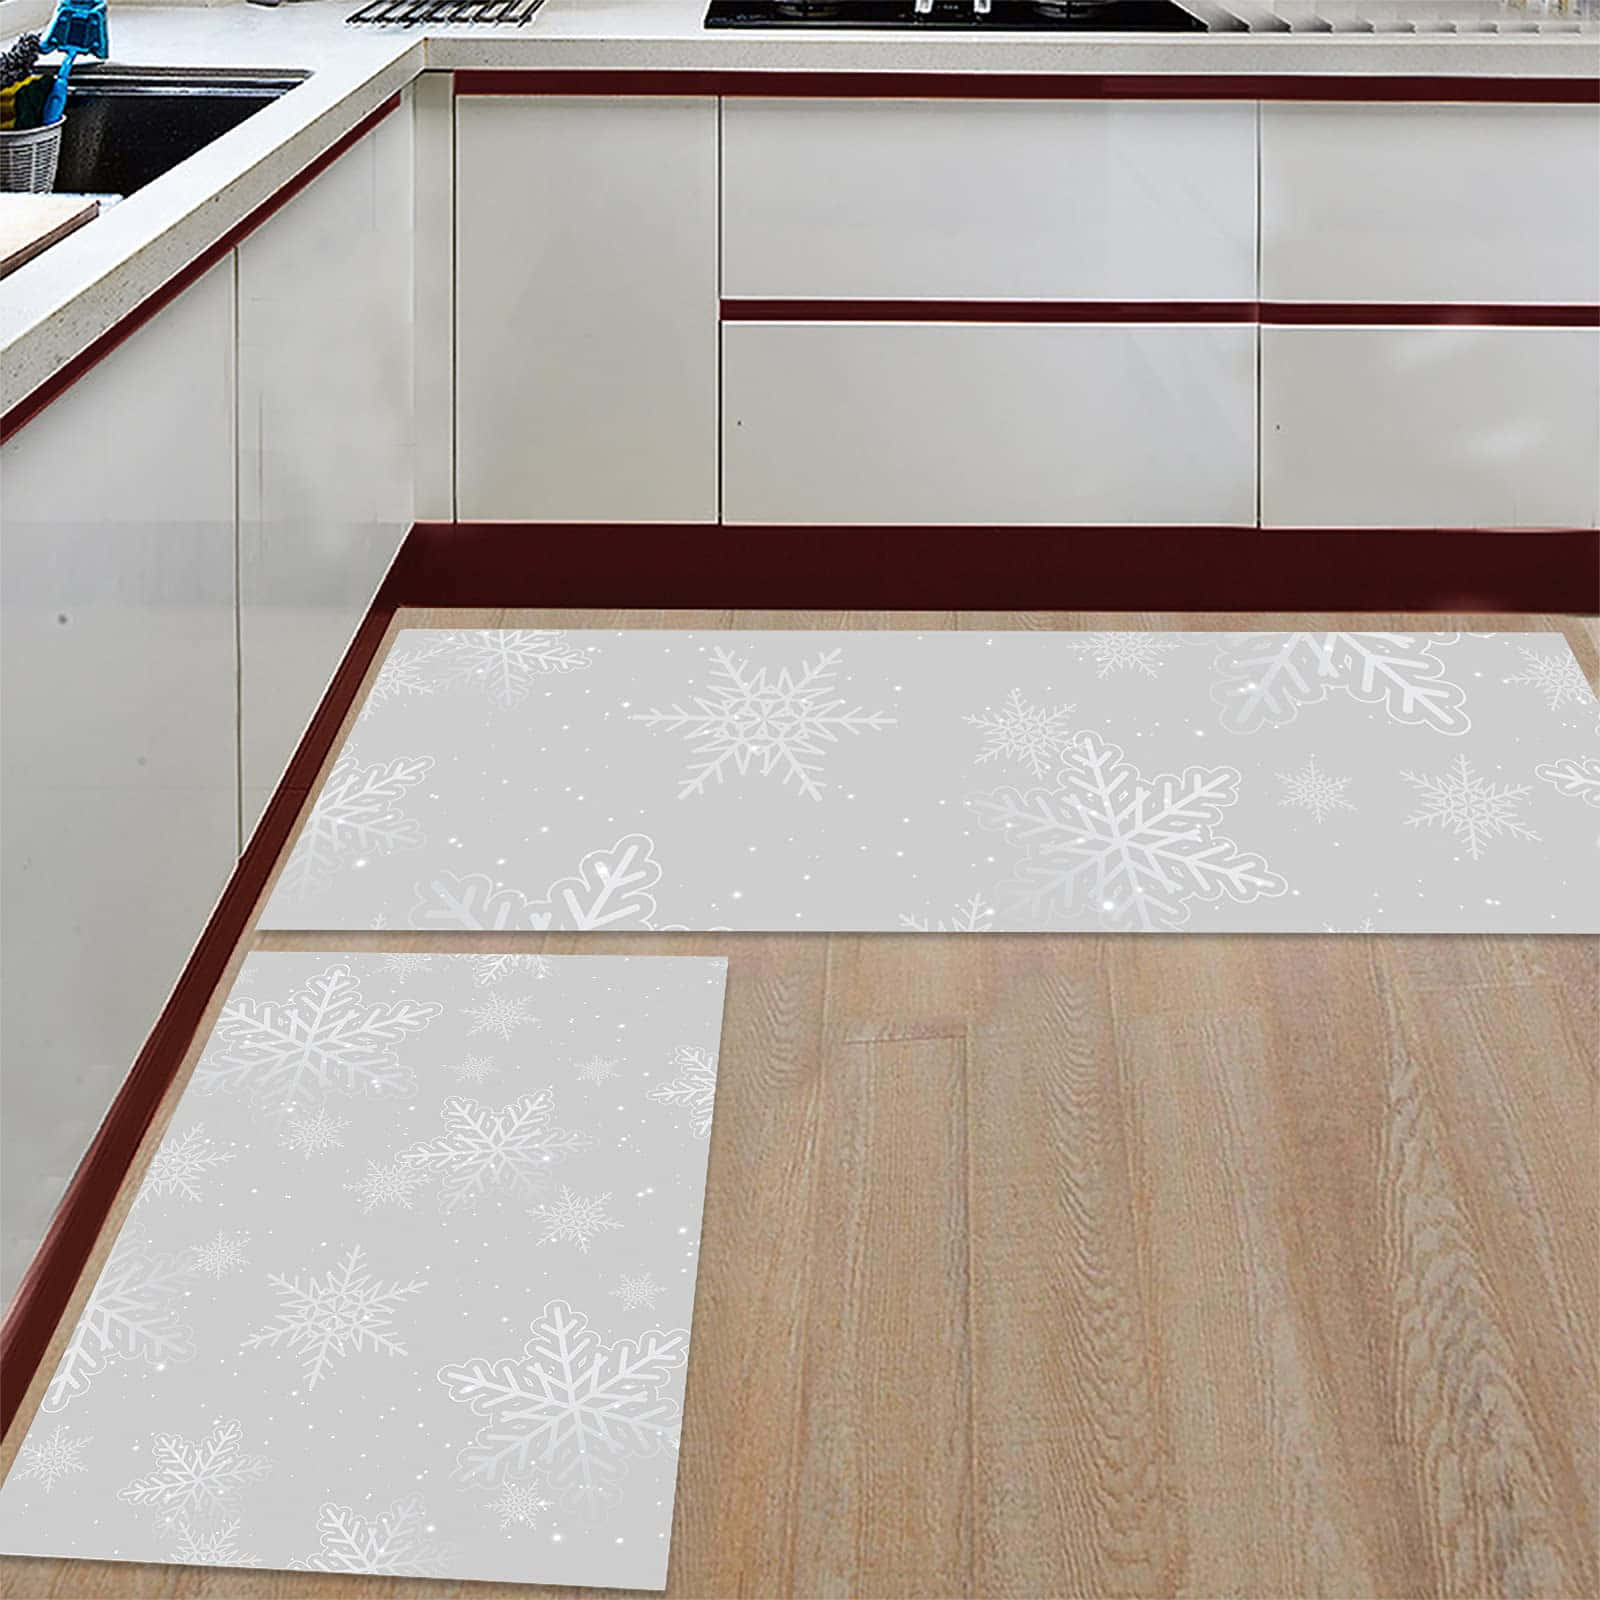 Two Kitchen Mats With Snowflakes On Them